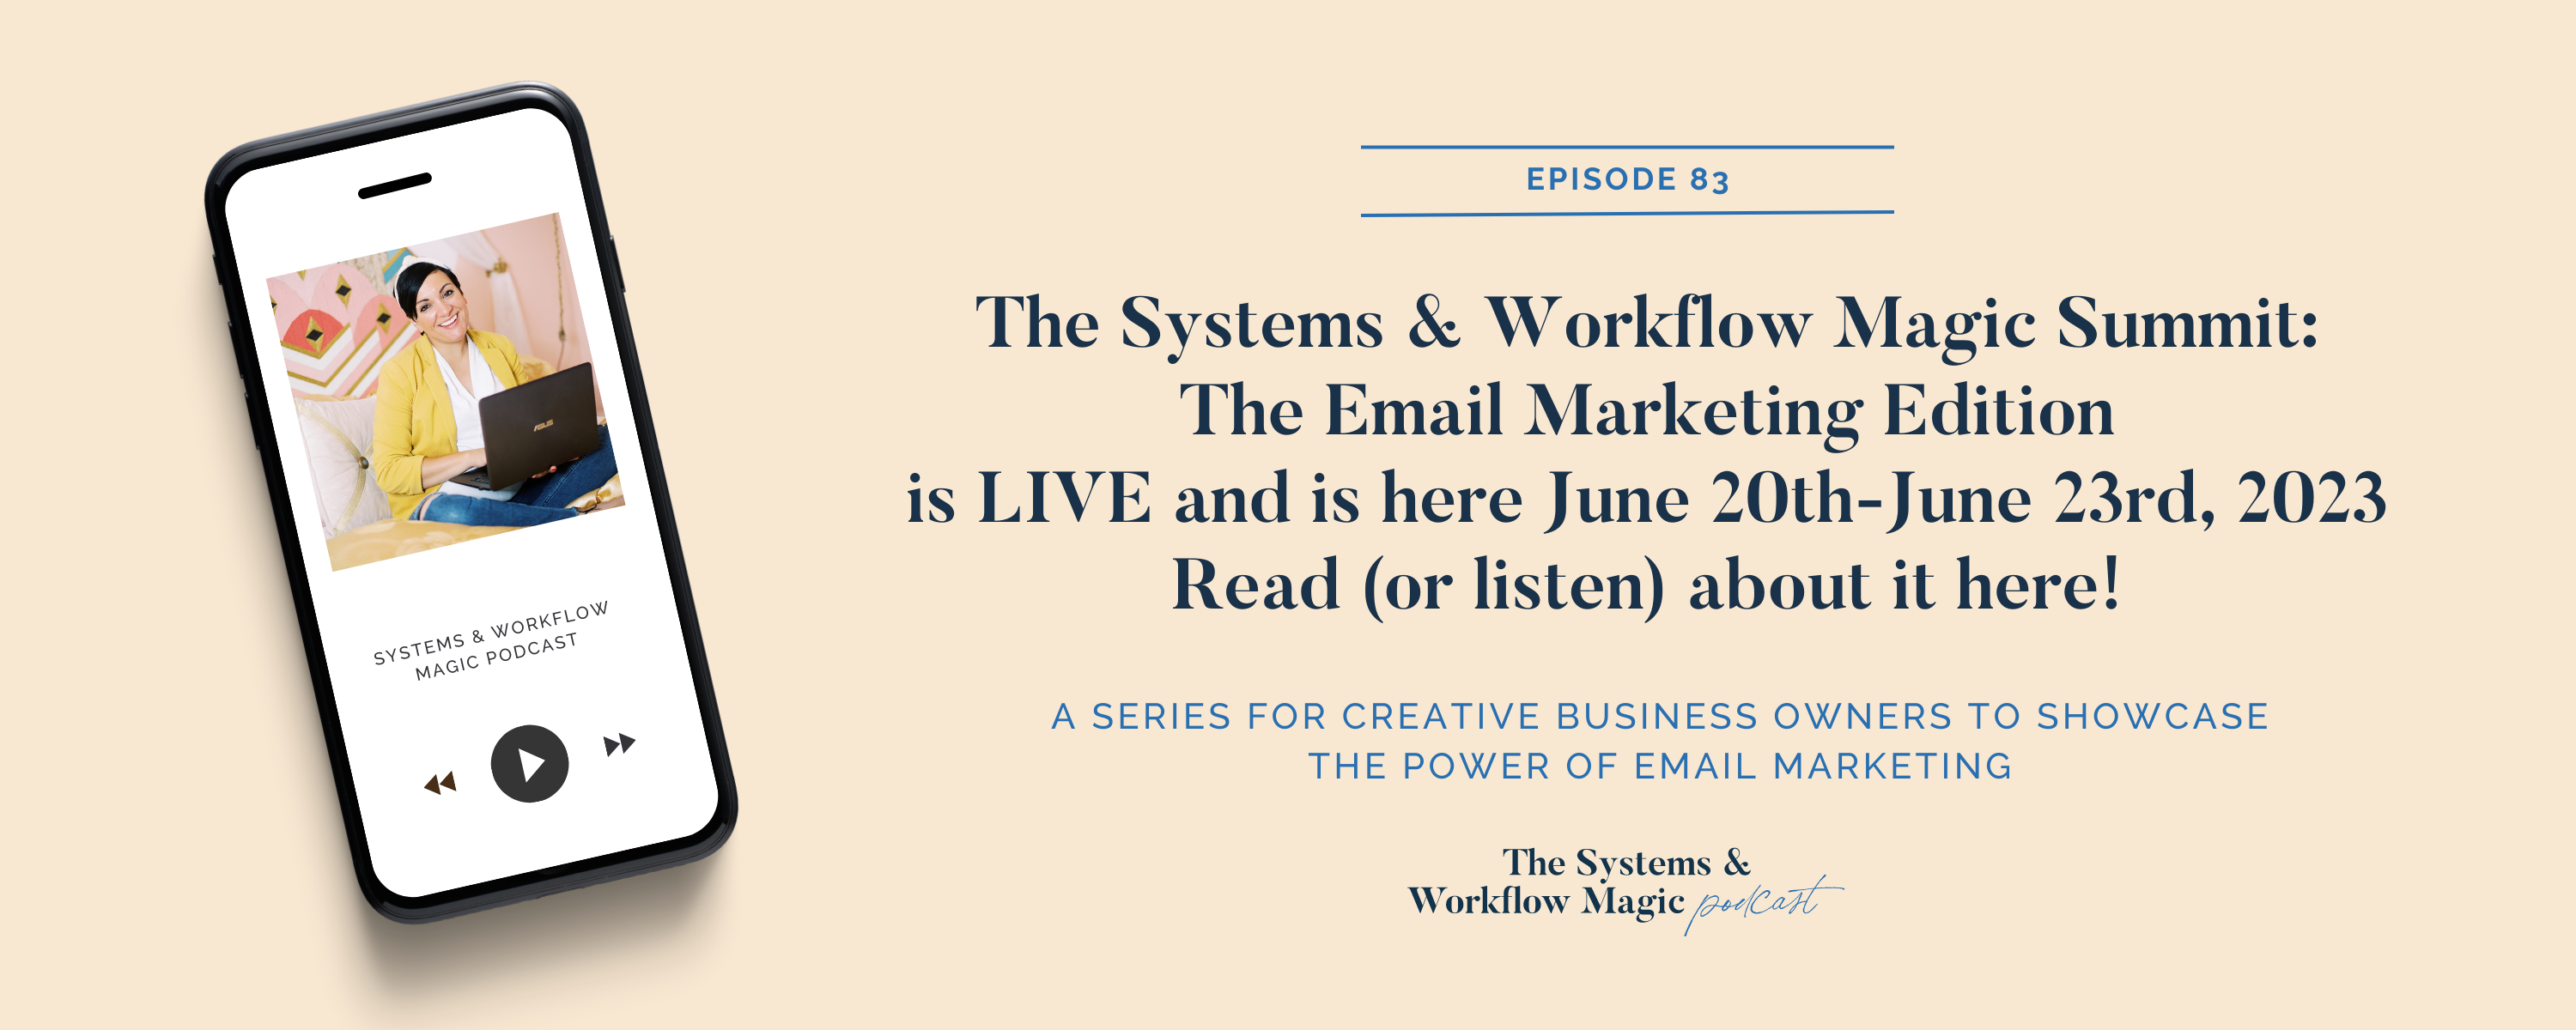 83: The Systems & Workflow Magic Summit: Email Marketing Edition is LIVE